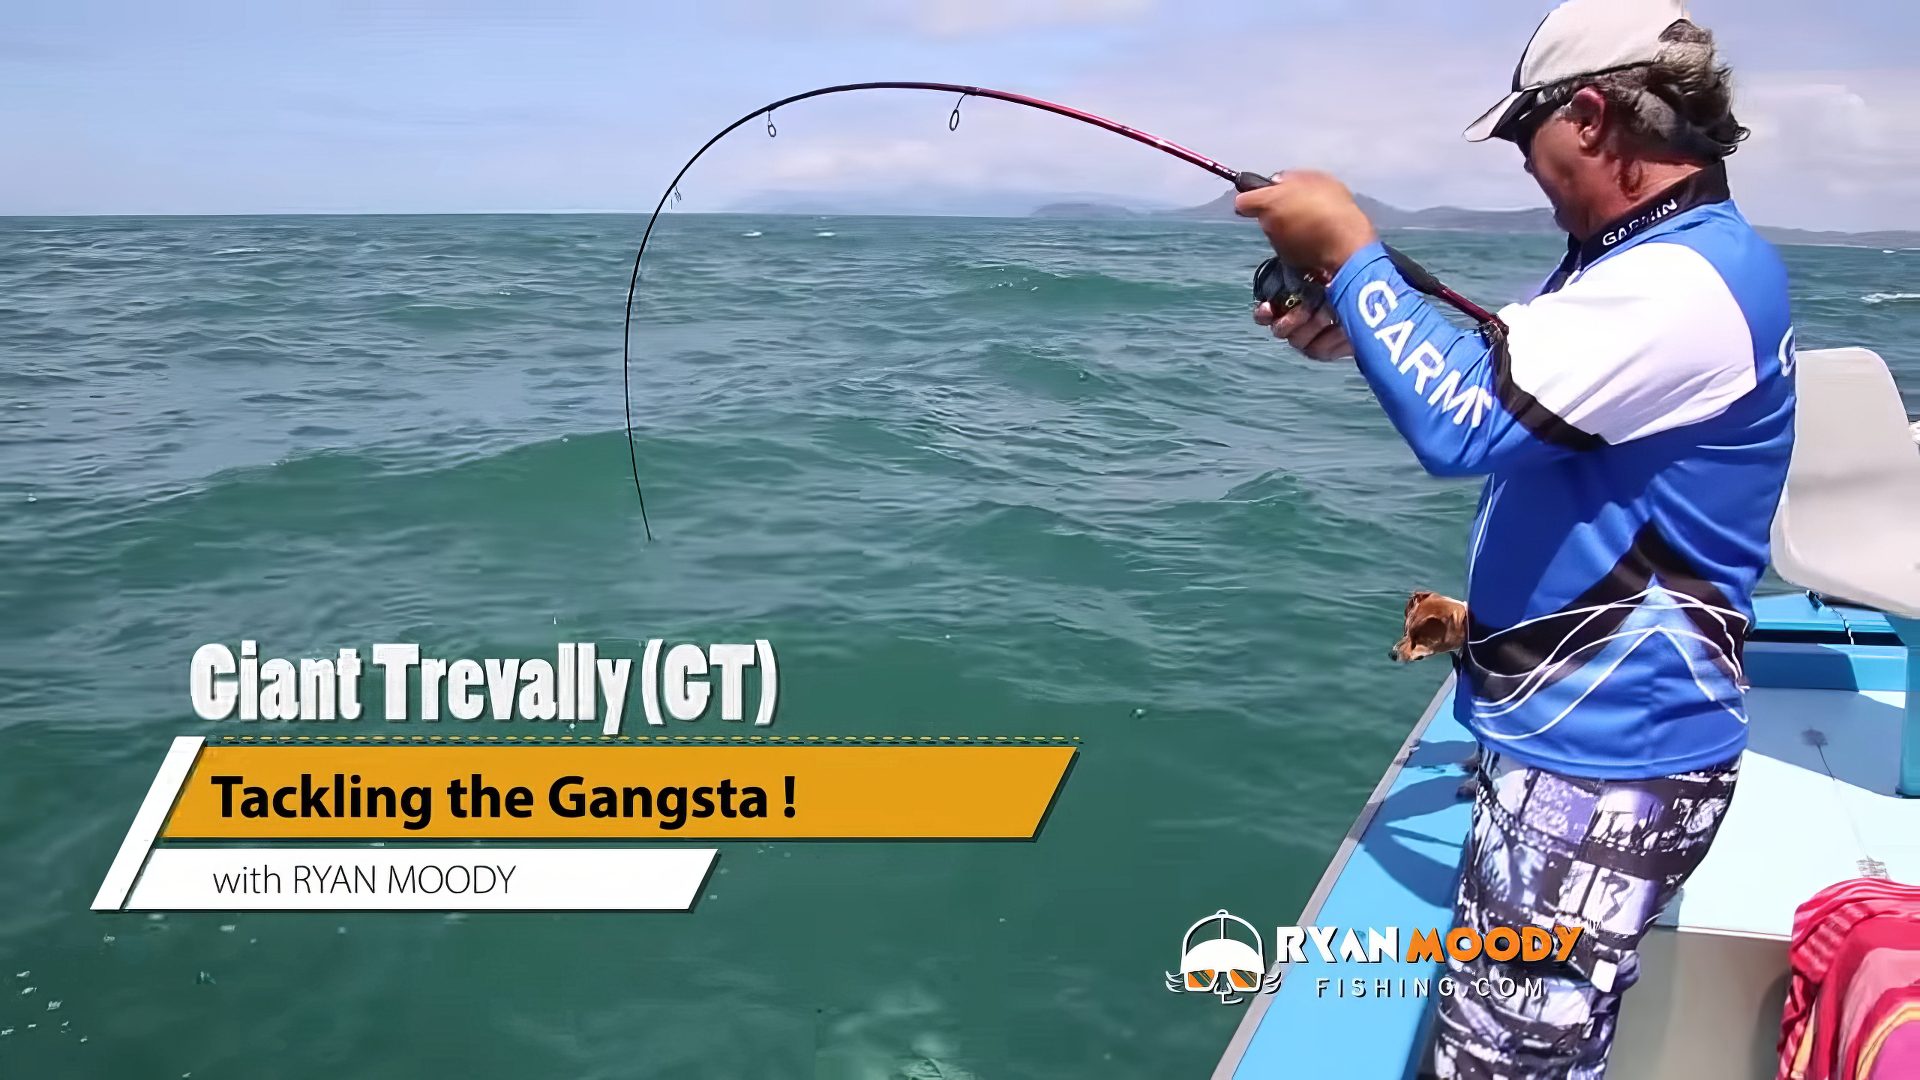 Catching Giant Trevally GT fishing-upscaled